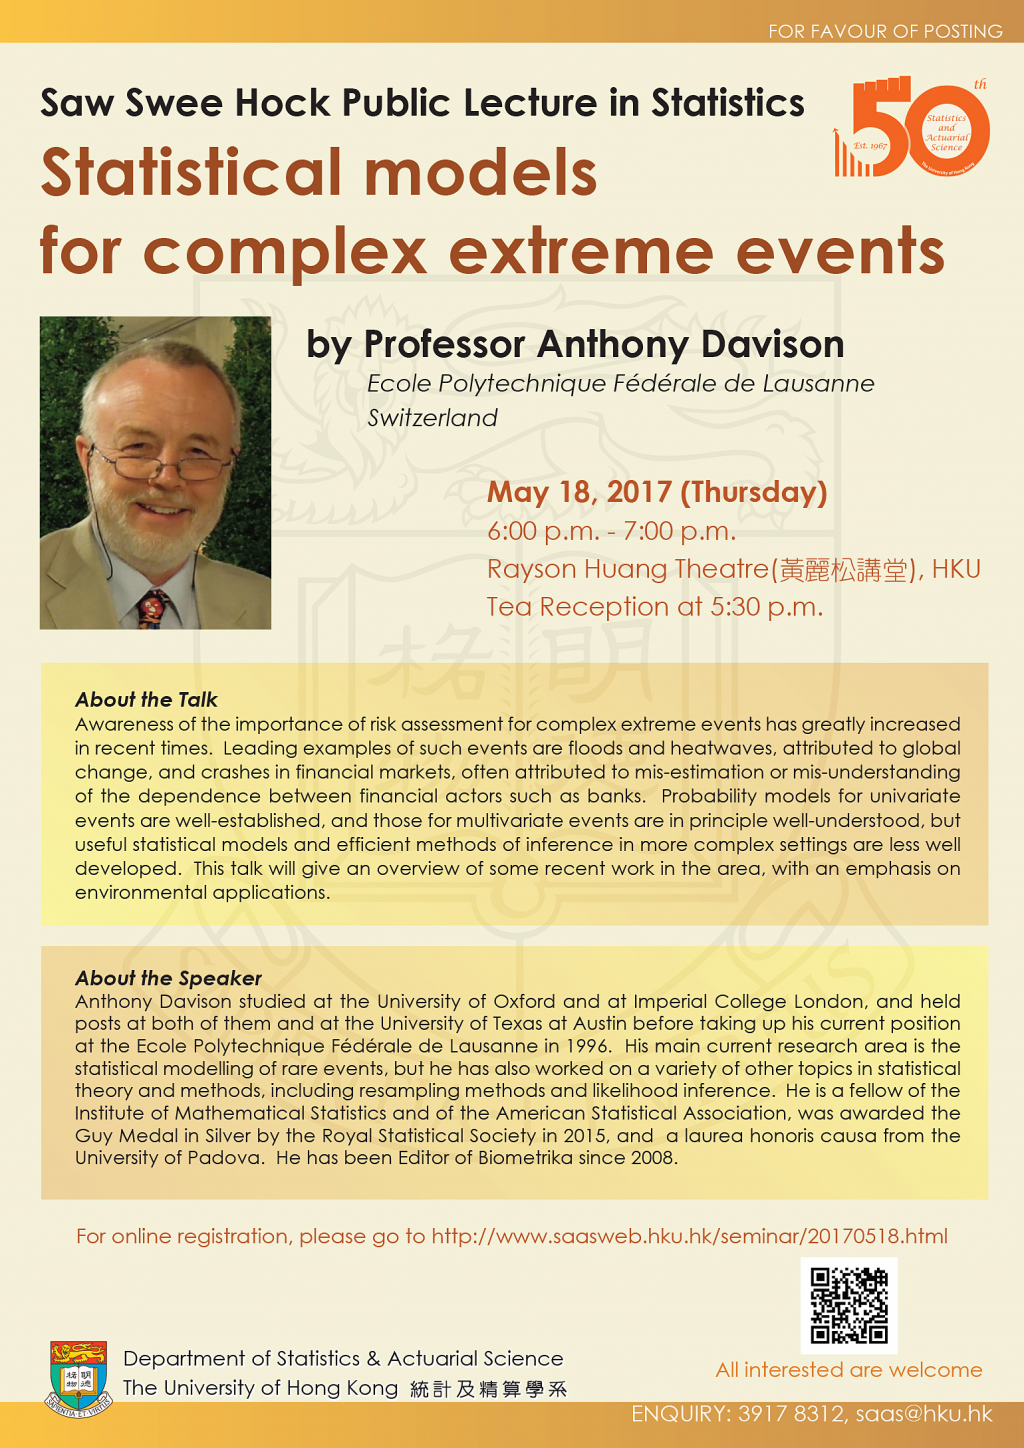 Saw Swee Hock Public Lecture in Statistics on 'Statistical models for complex extreme events' by Professor Anthony Davison on May 18, 2017